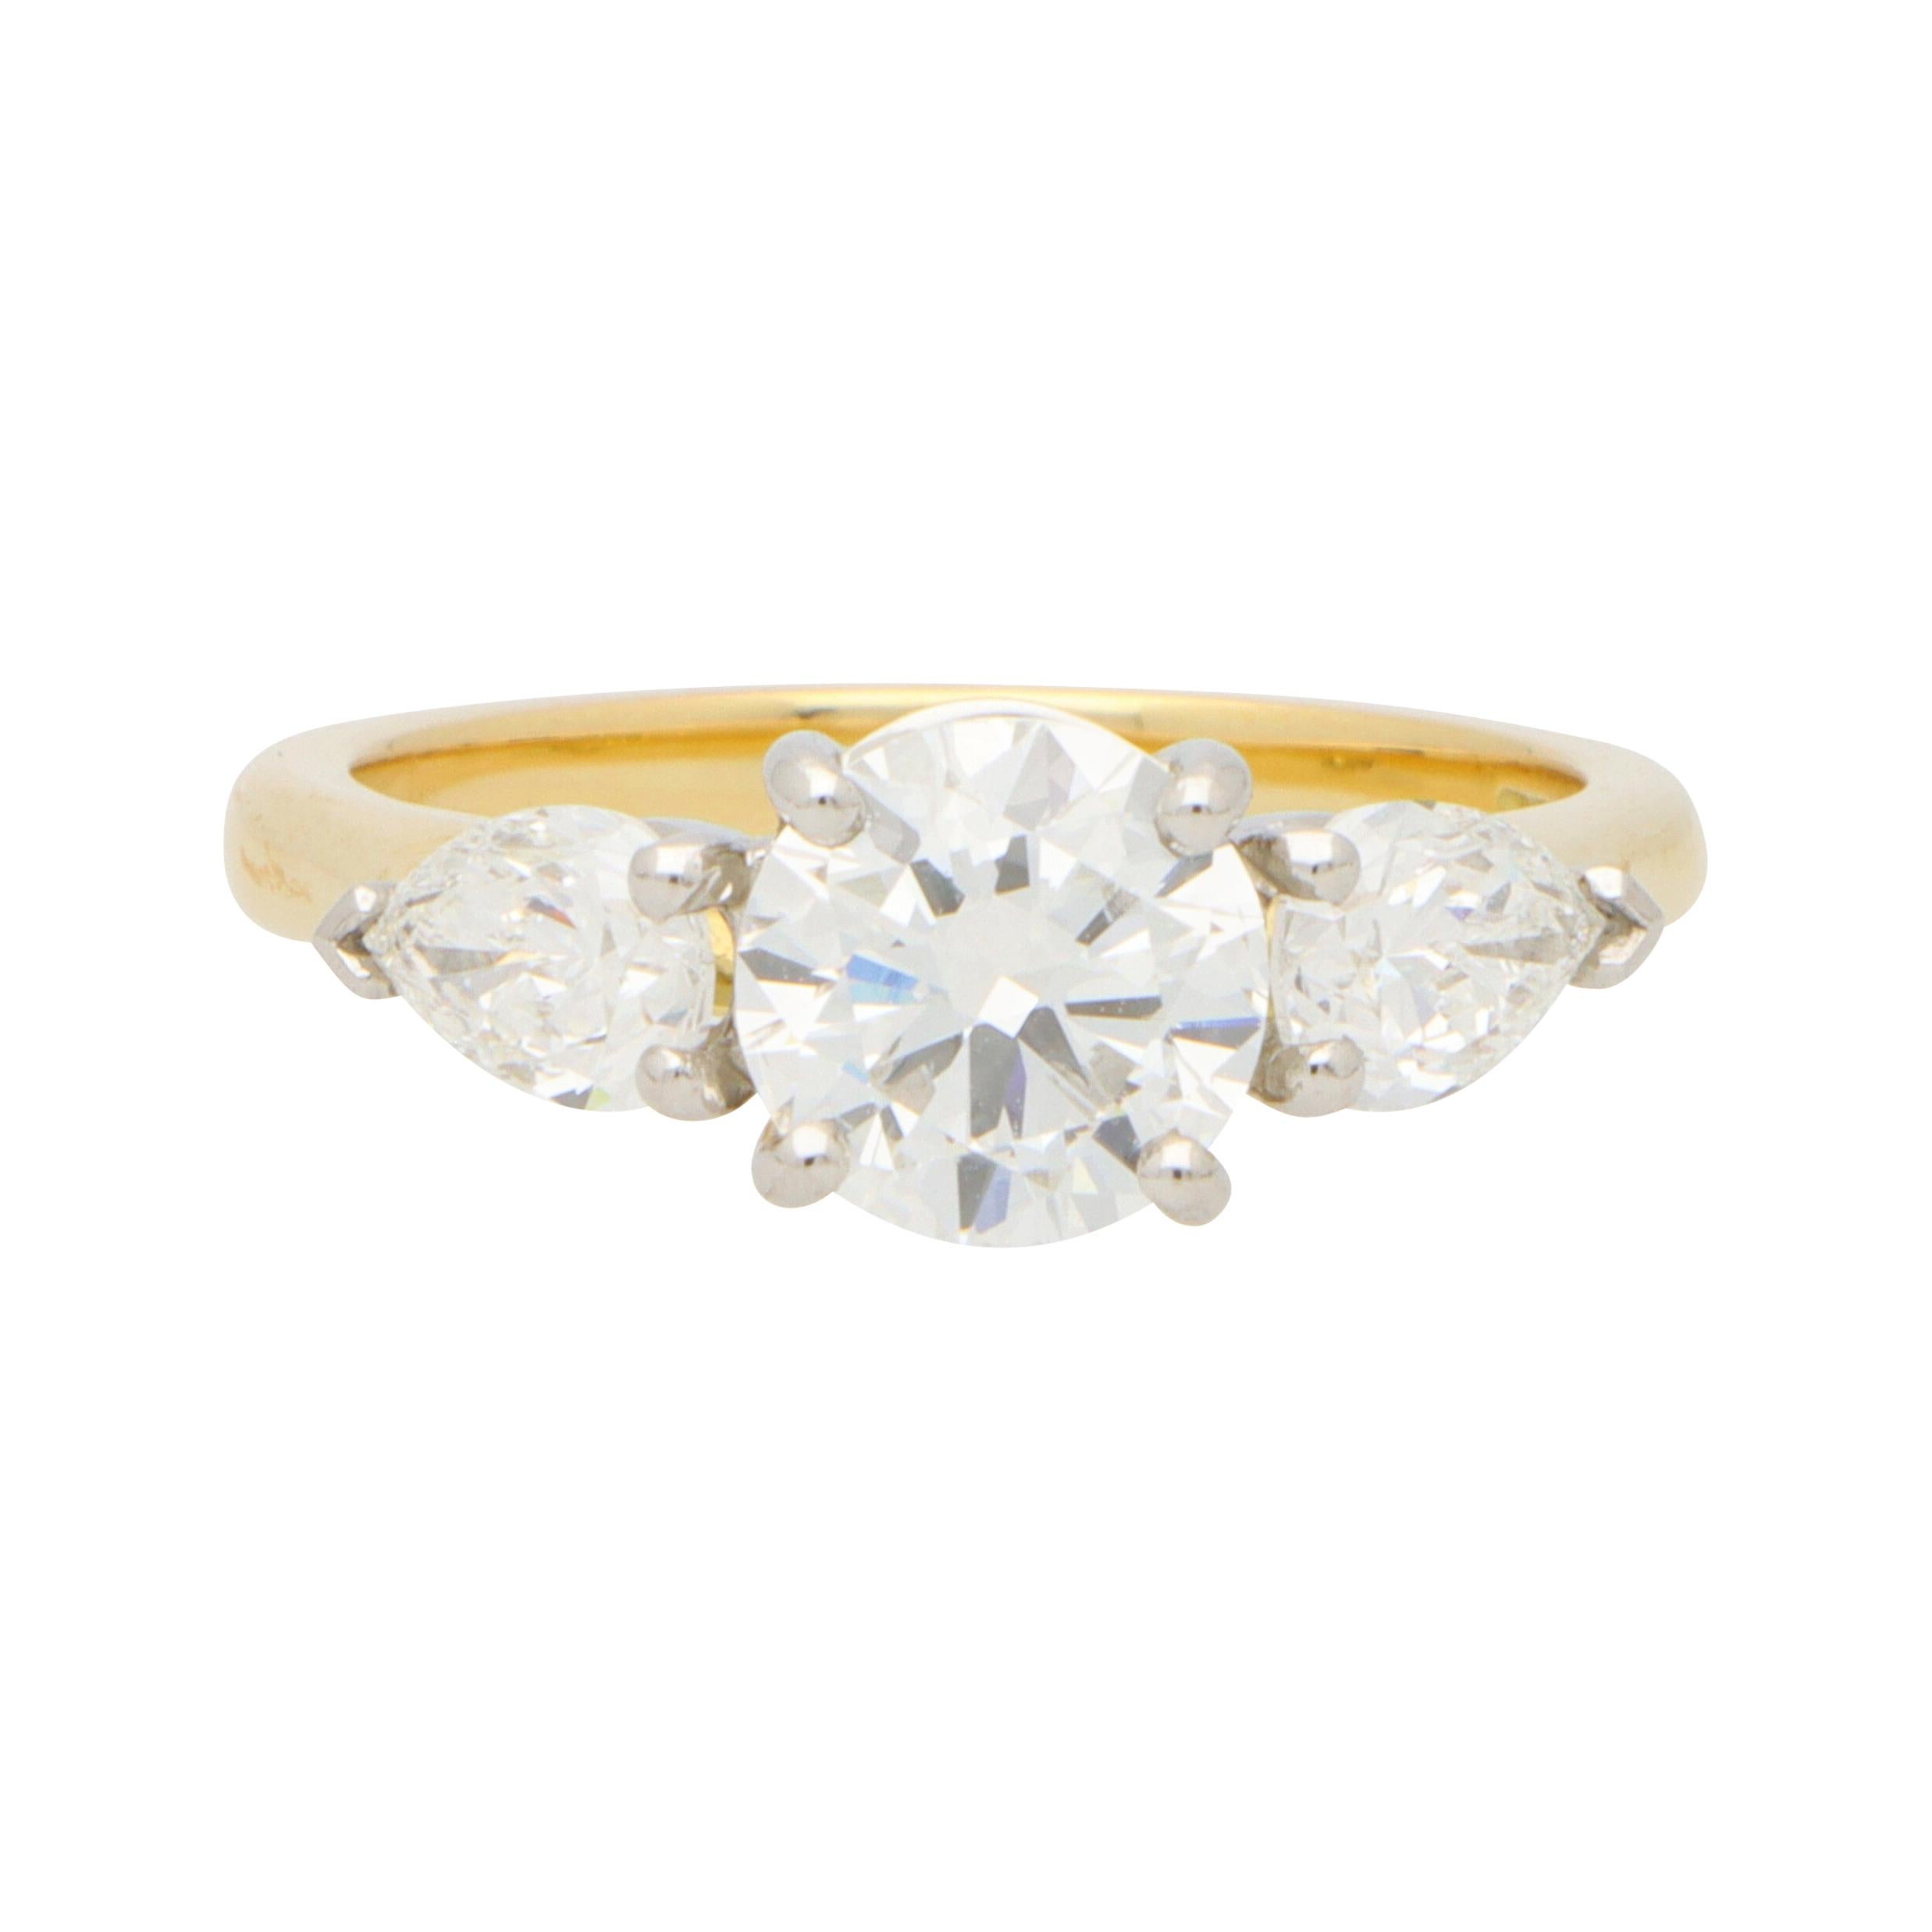 GIA Certified Round and Pear Cut Diamond Engagement Ring Set in 18k Gold